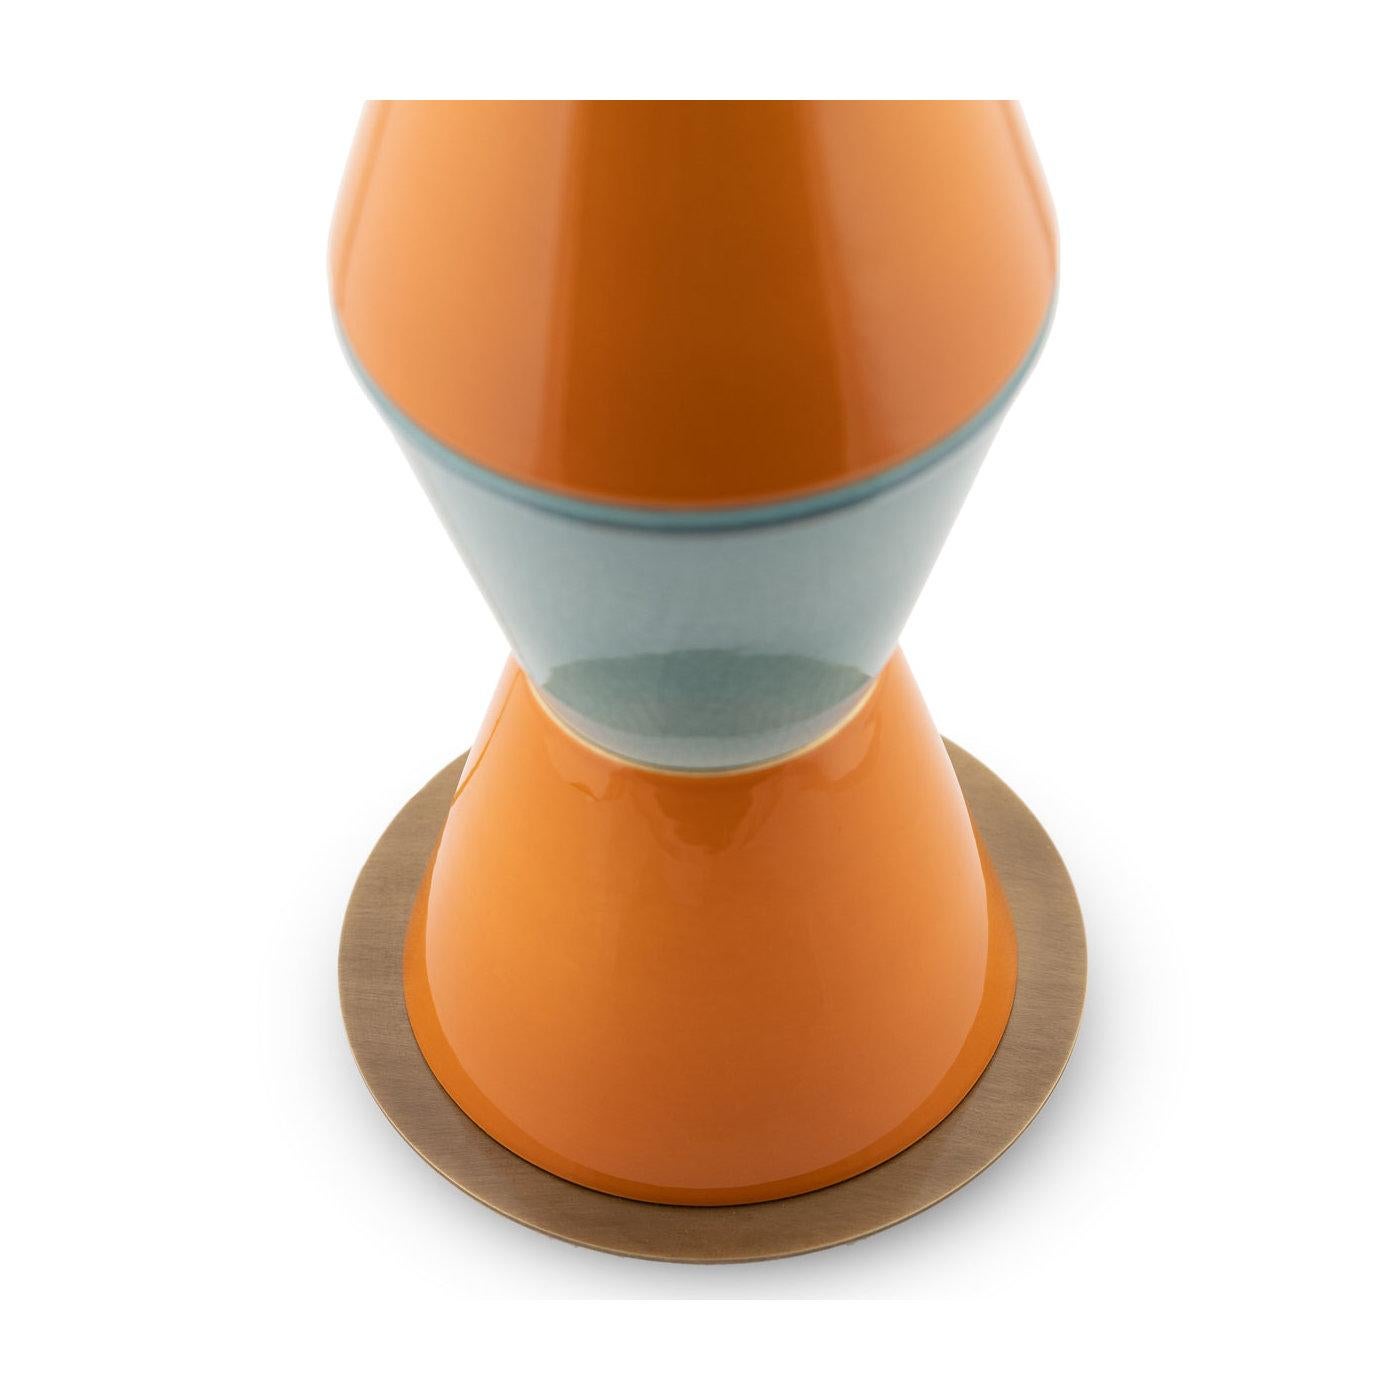 A splendid combination of minimalist and sculptural design, this table lamp is distinguished by an eye-catching silhouette of strong geometric value. Composed of five truncated cone elements fashioned of aquamarine and orange-glazed ceramic, it